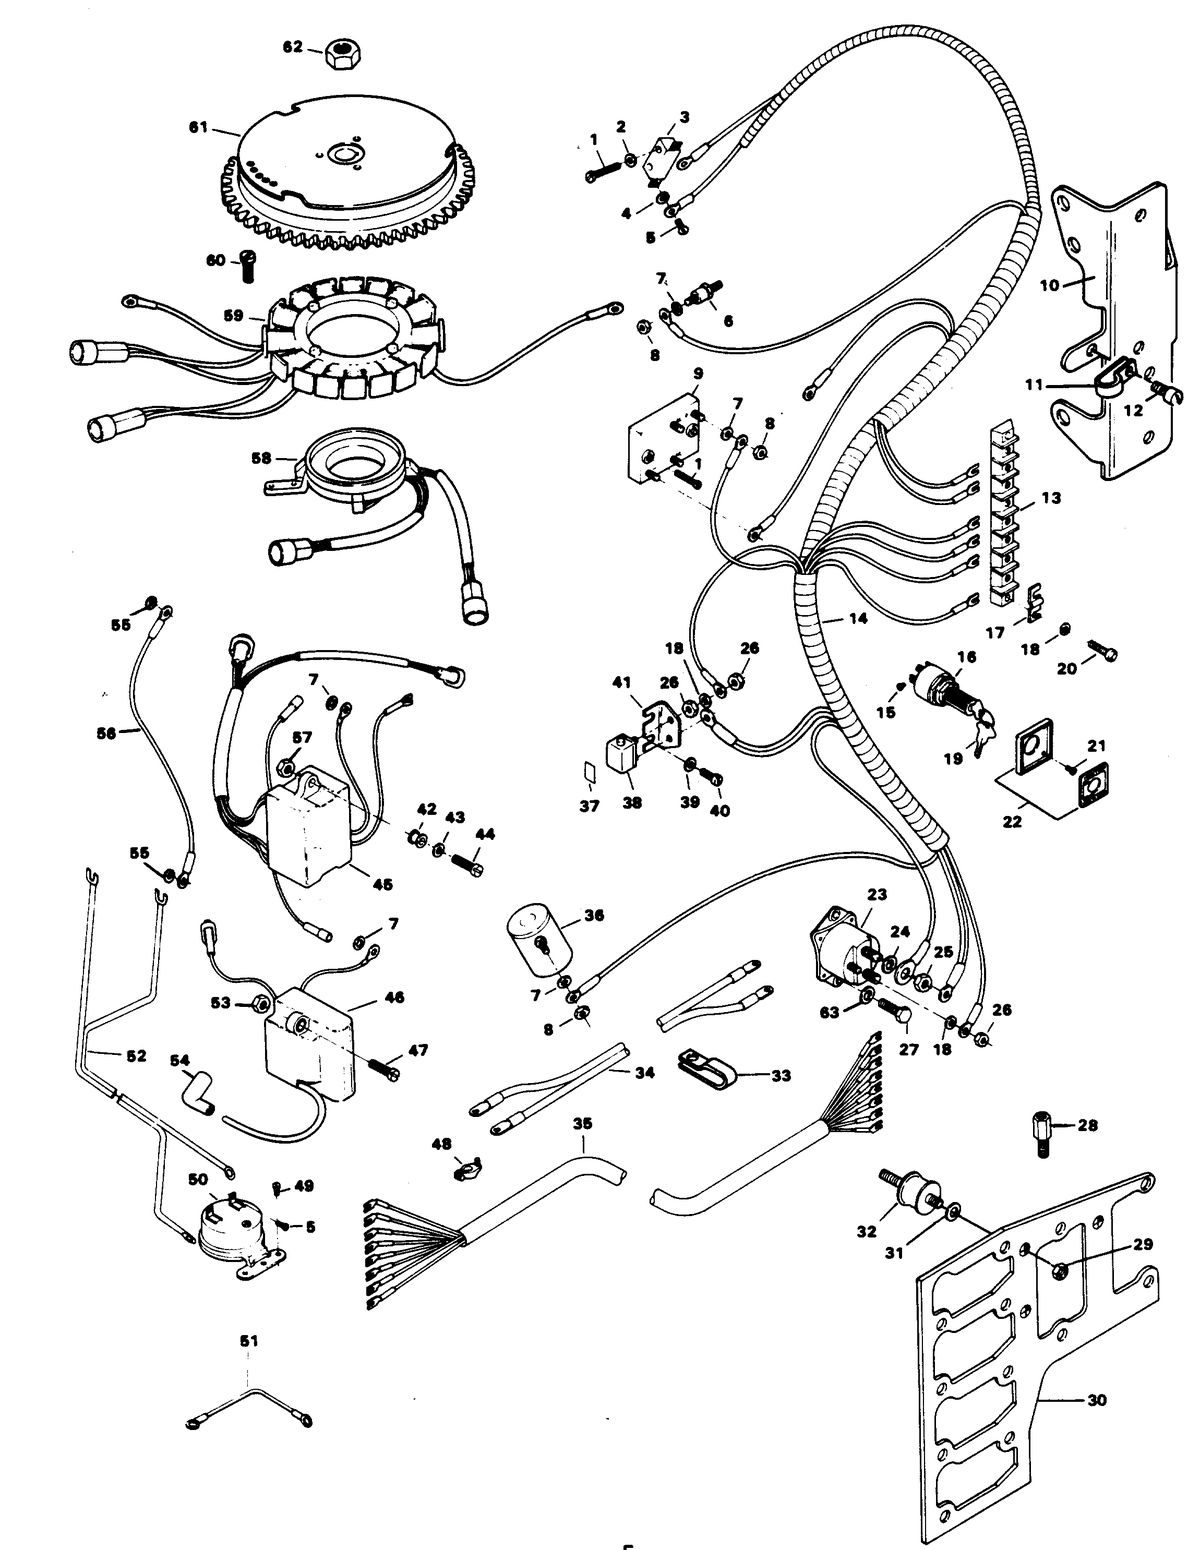 CHRYSLER 125 H.P. ELECTRICAL COMPONENTS